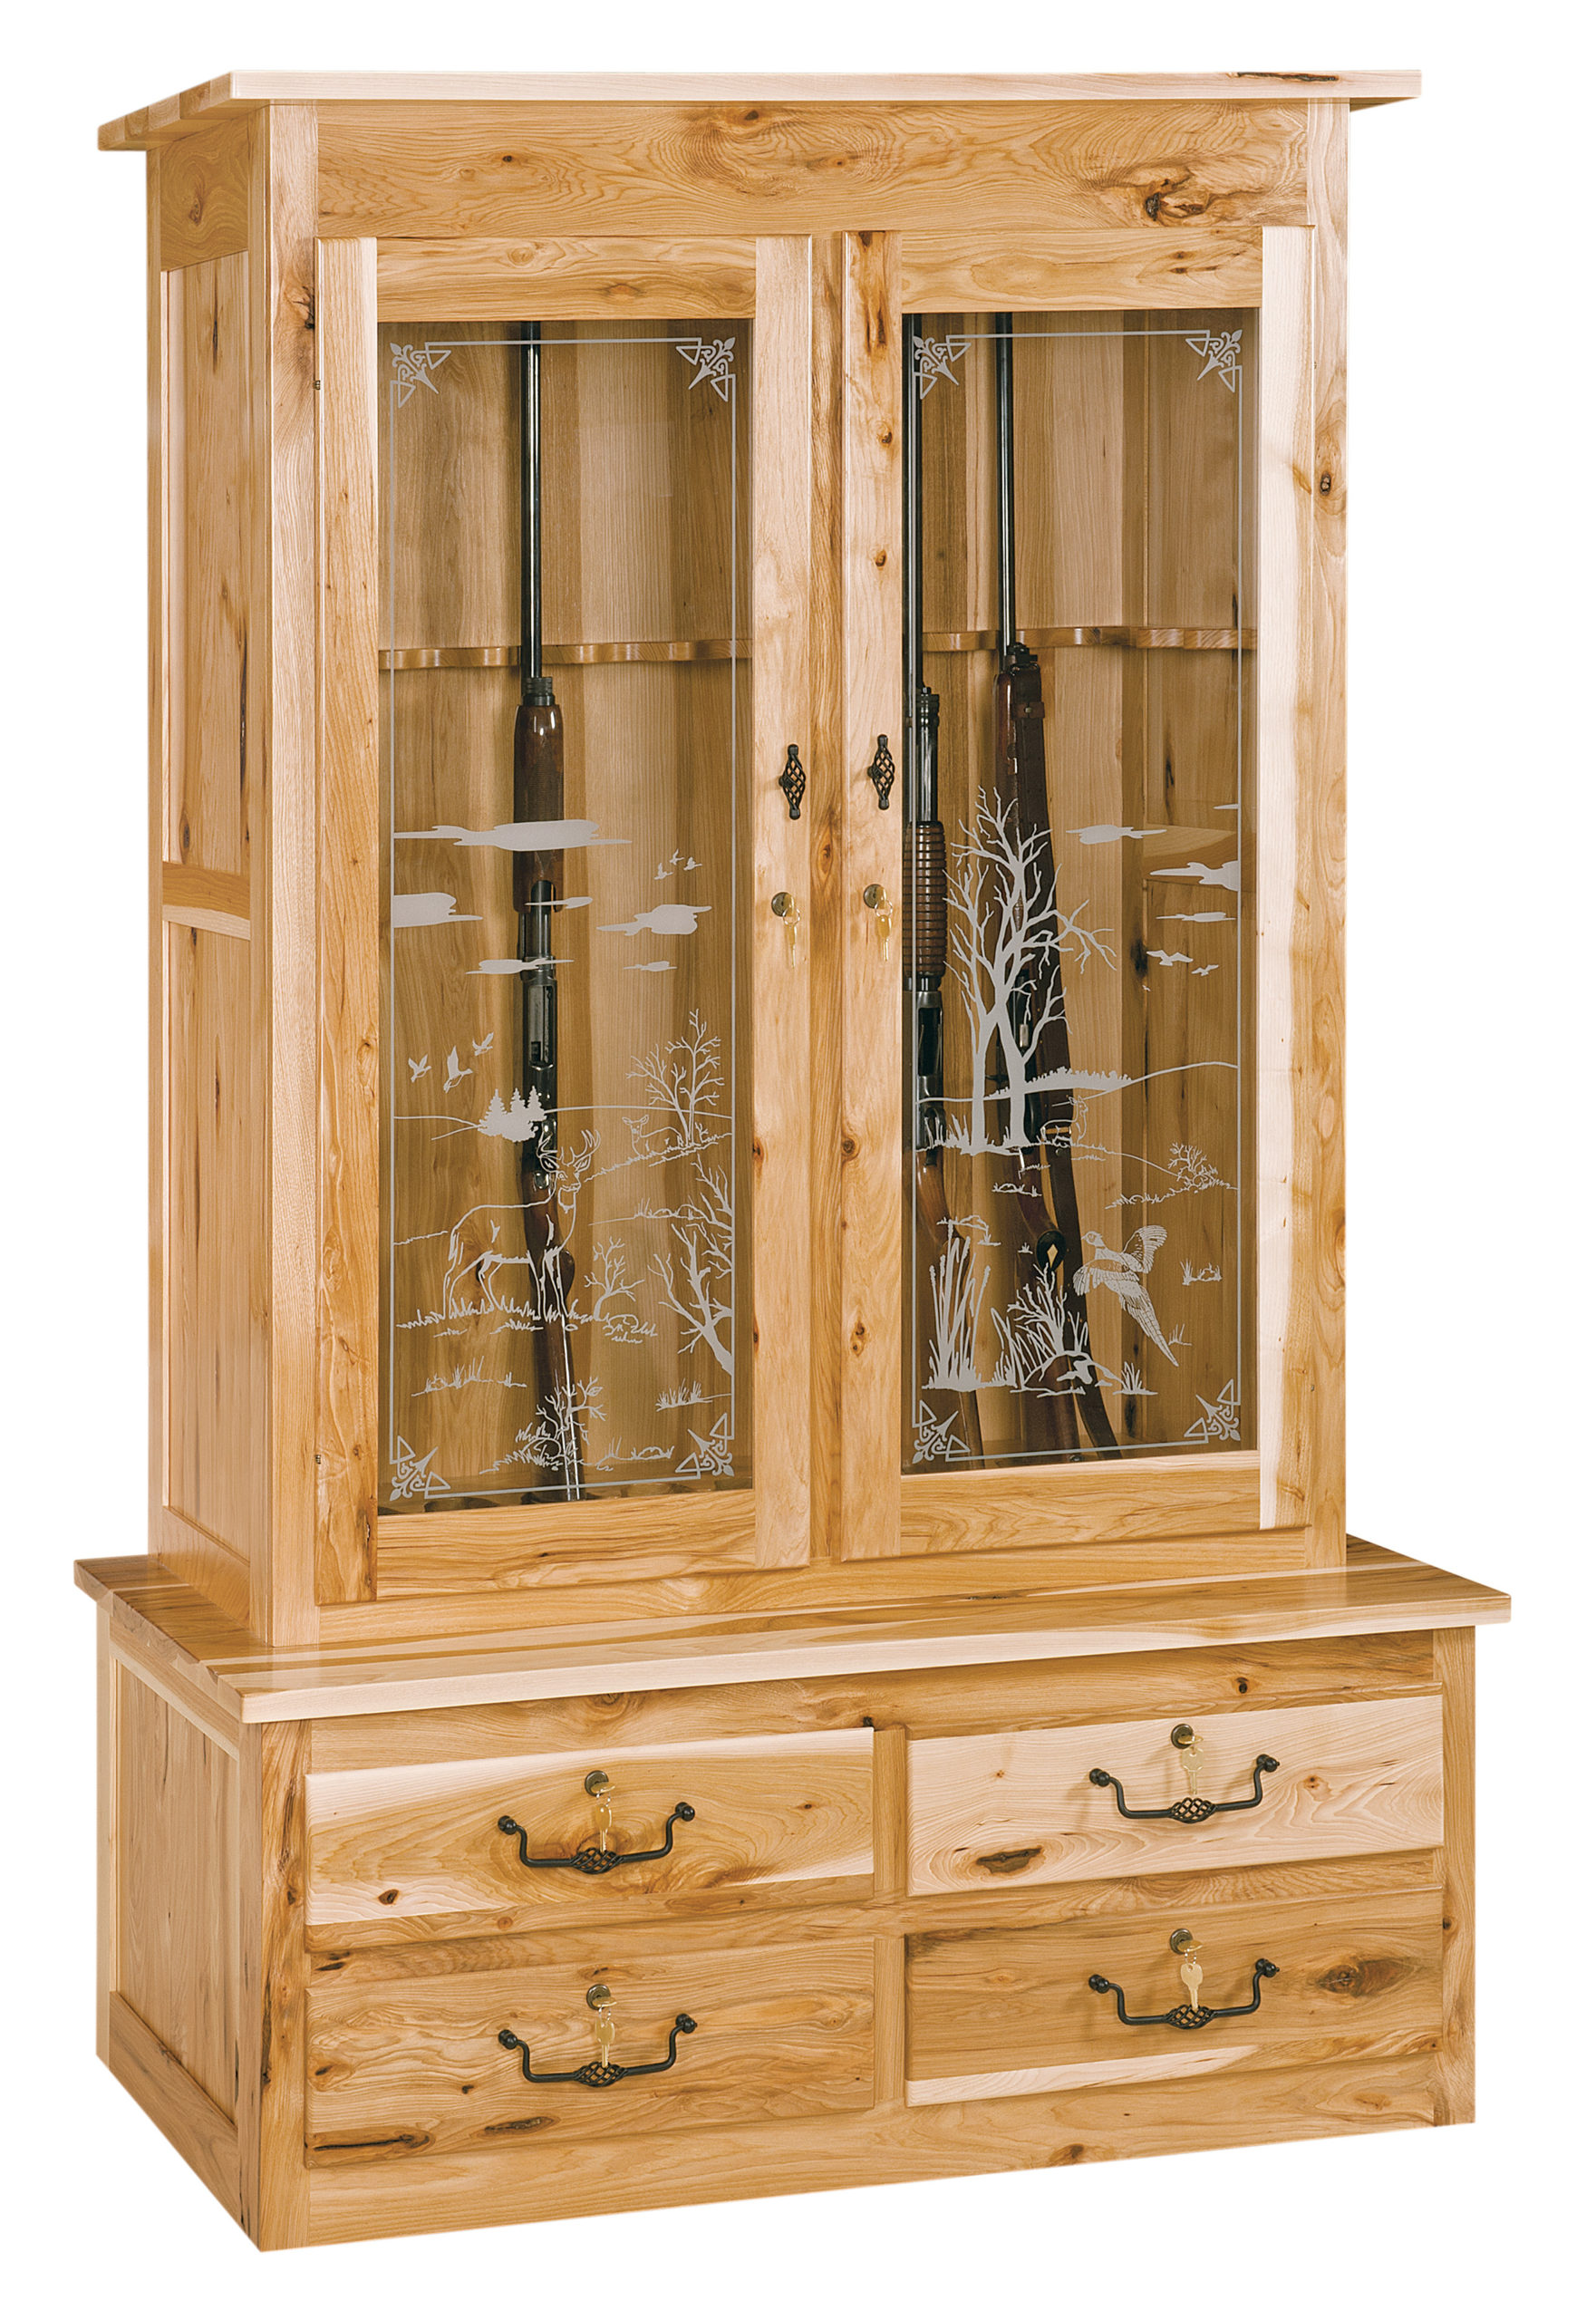 Witmer Gun Cabinet Amish Solid Wood Cabinets Kvadro Furniture